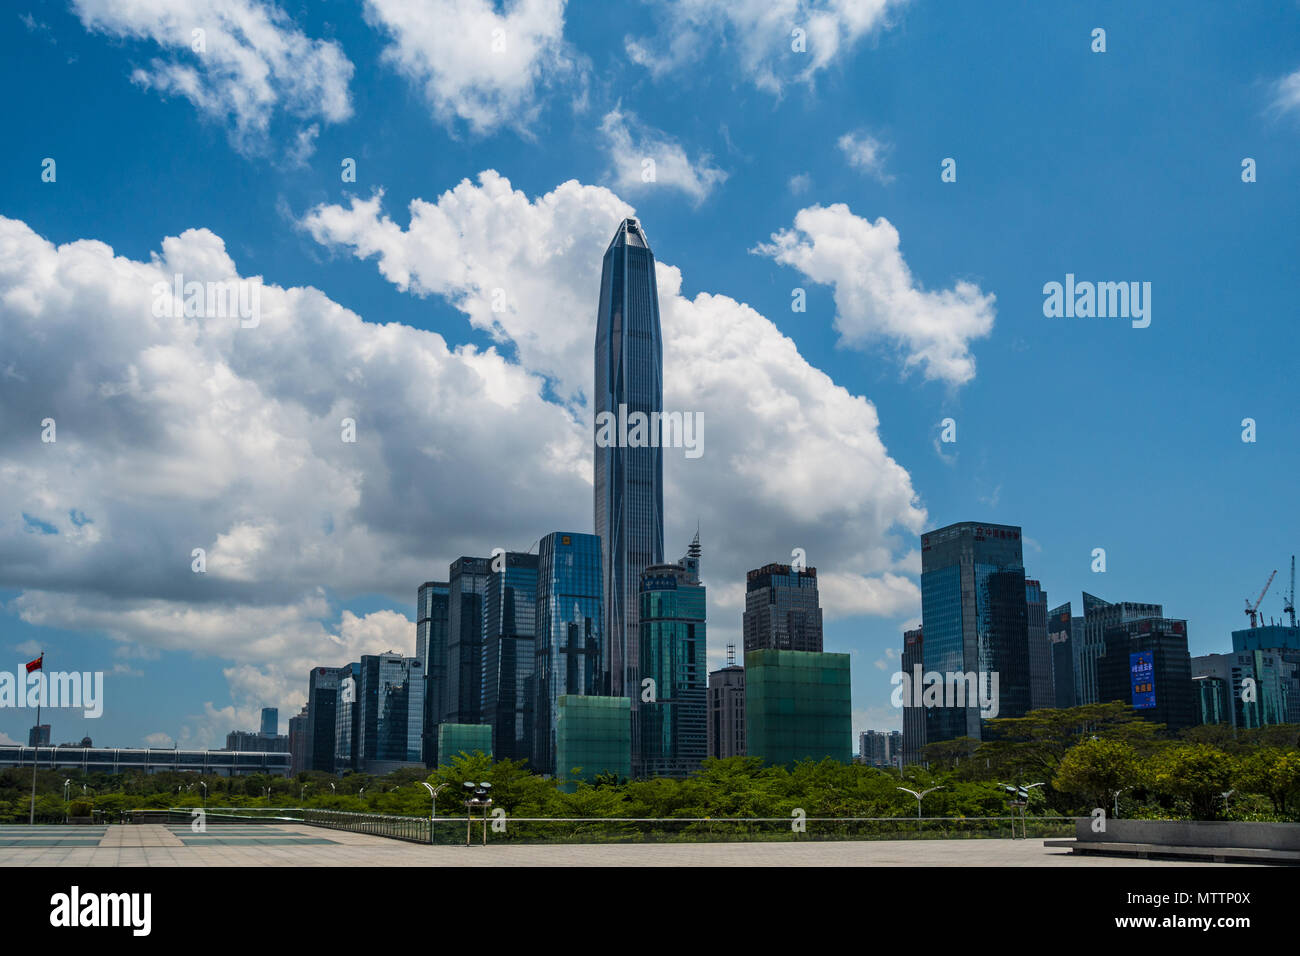 Shenzhen skyline in the business district (Futian) featuring city's tallest building Ping An tower in Shenzhen, China Stock Photo